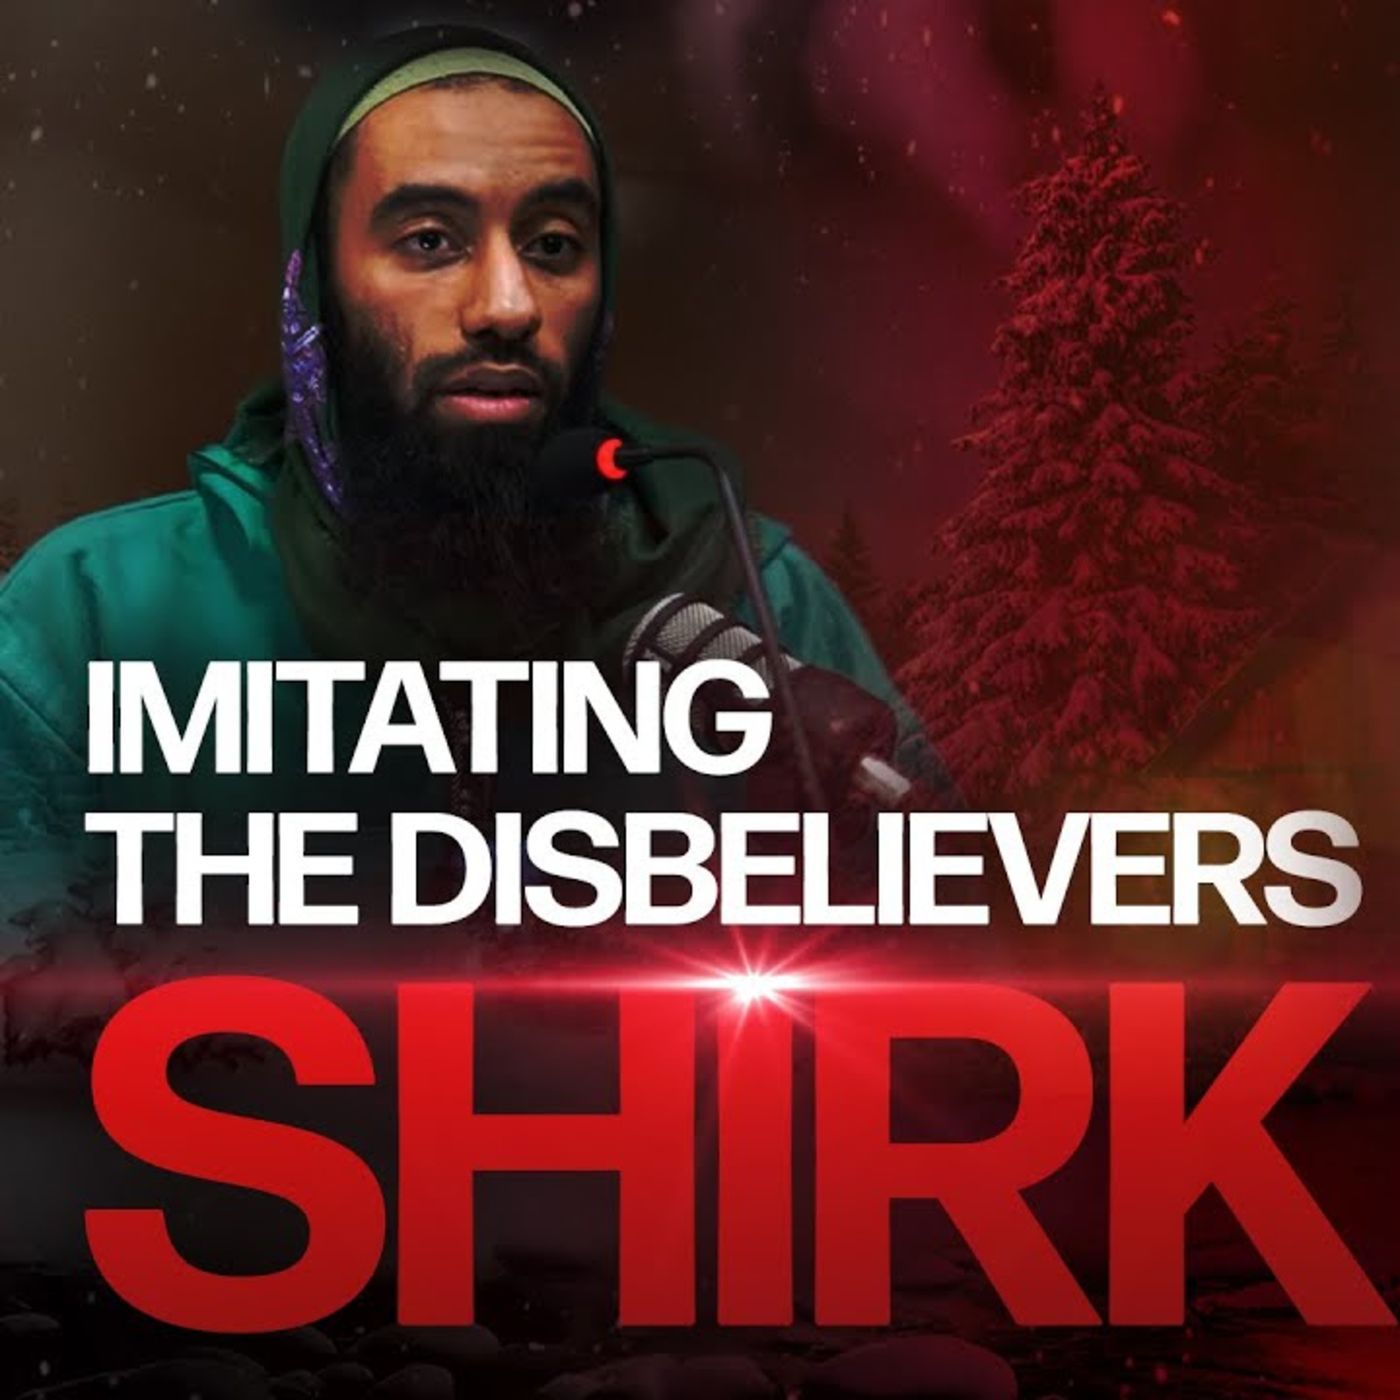 Effects Of Imitating the Disbelievers || Christmas Or Shirkmas?